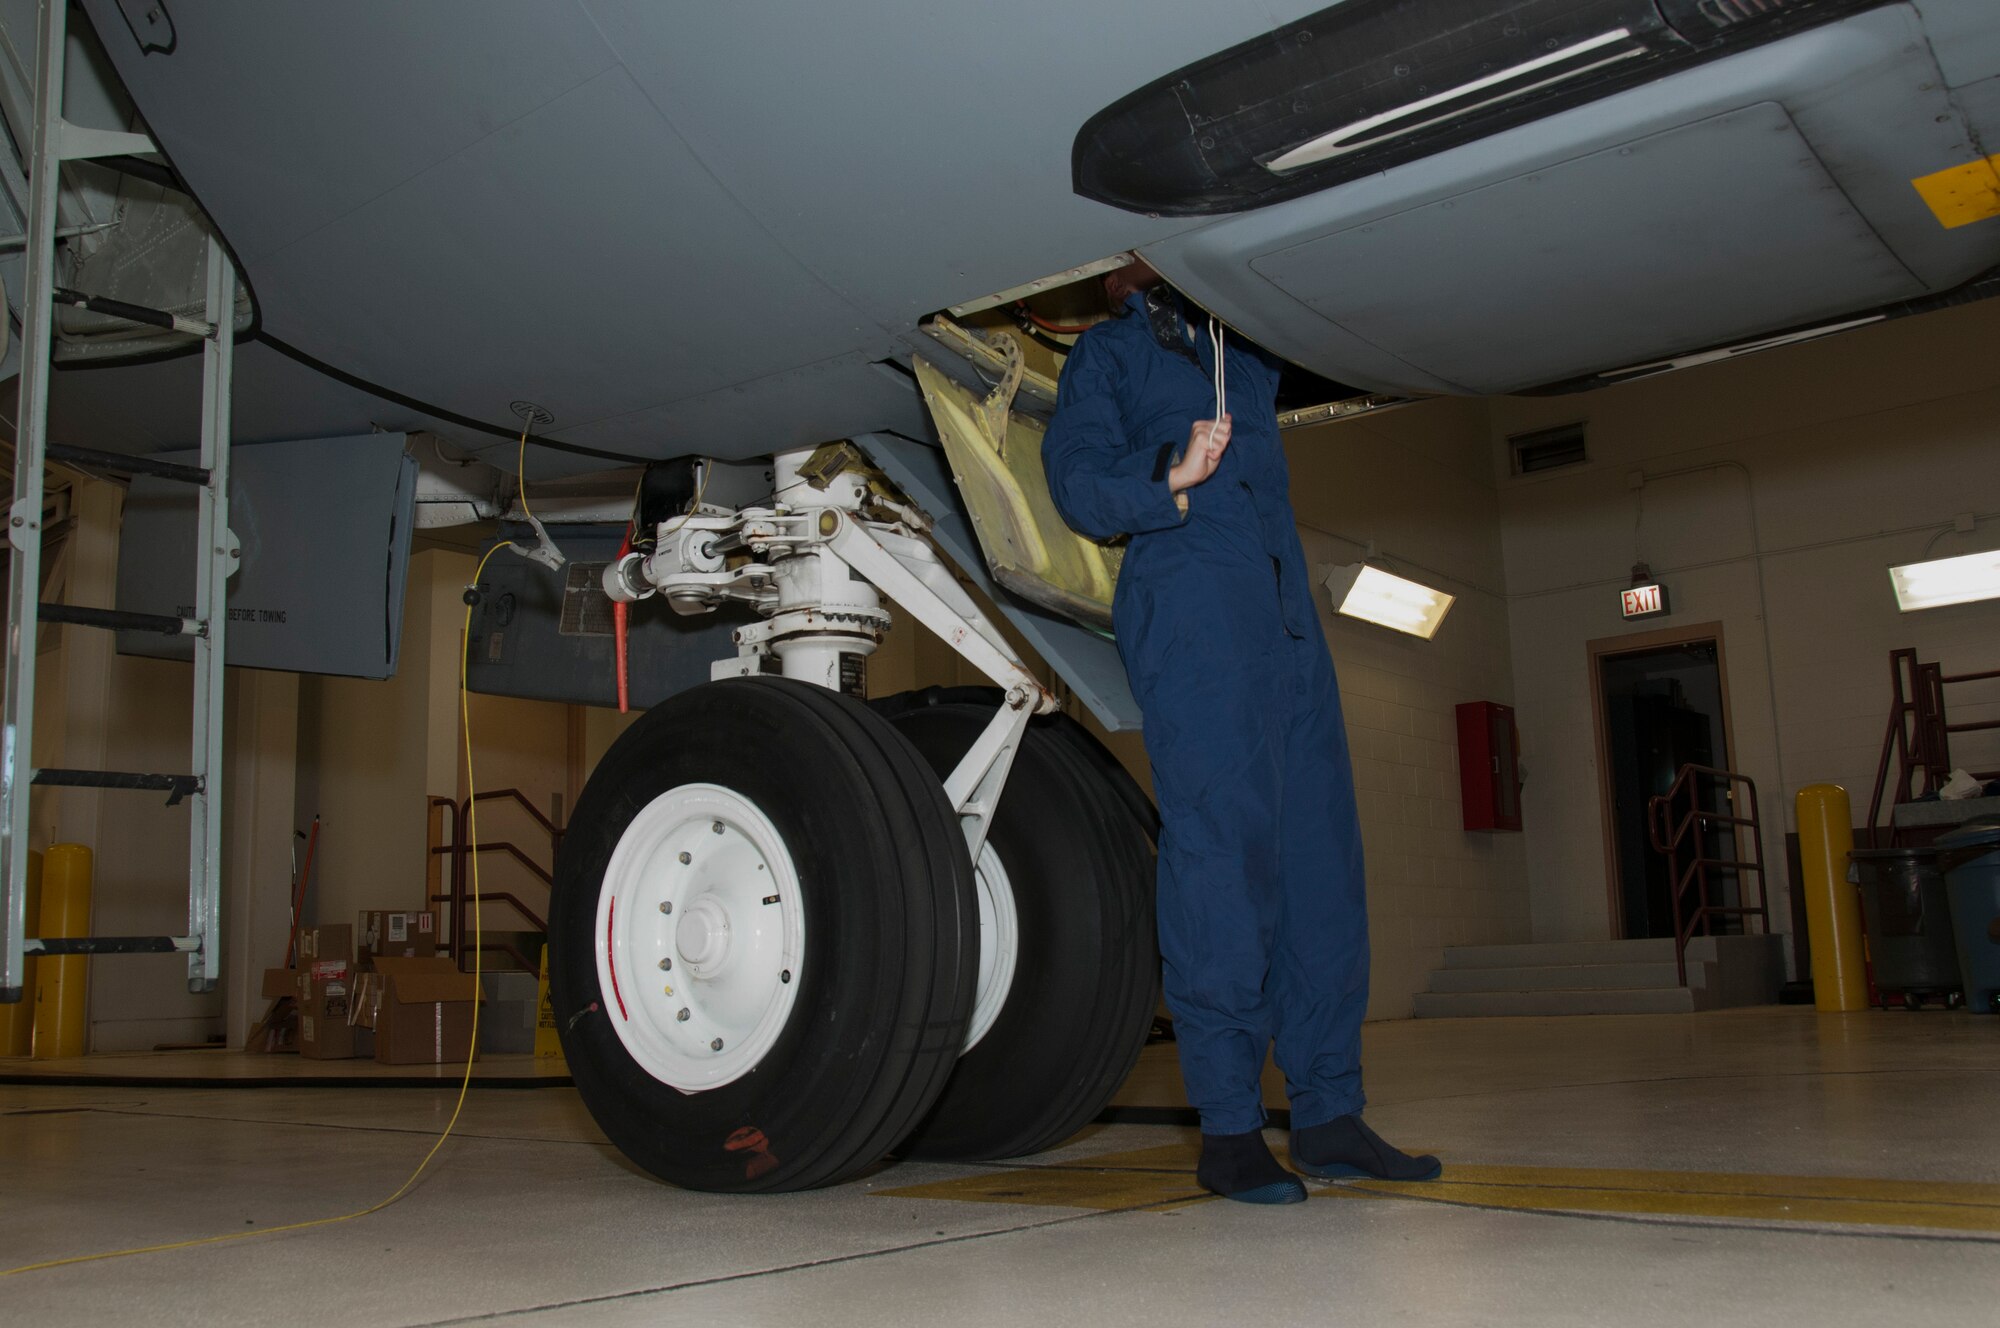 Staff Sgt. Julia Meyer, a fuels systems mechanic with the 168th Maintenance Squadron, finishes the lacing for the fuel system zero-cell access area of the KC-135R inside the unit's fuel cell hangar at Eielson AFB, Alaska, October 18, 2016. Meyer is a fulltime technician with the Interior-Alaska unit and recently returned home from her third deployment to Southwest Asia. (U.S. Air National Guard photo by Senior Master Sgt. Paul Mann/Released)